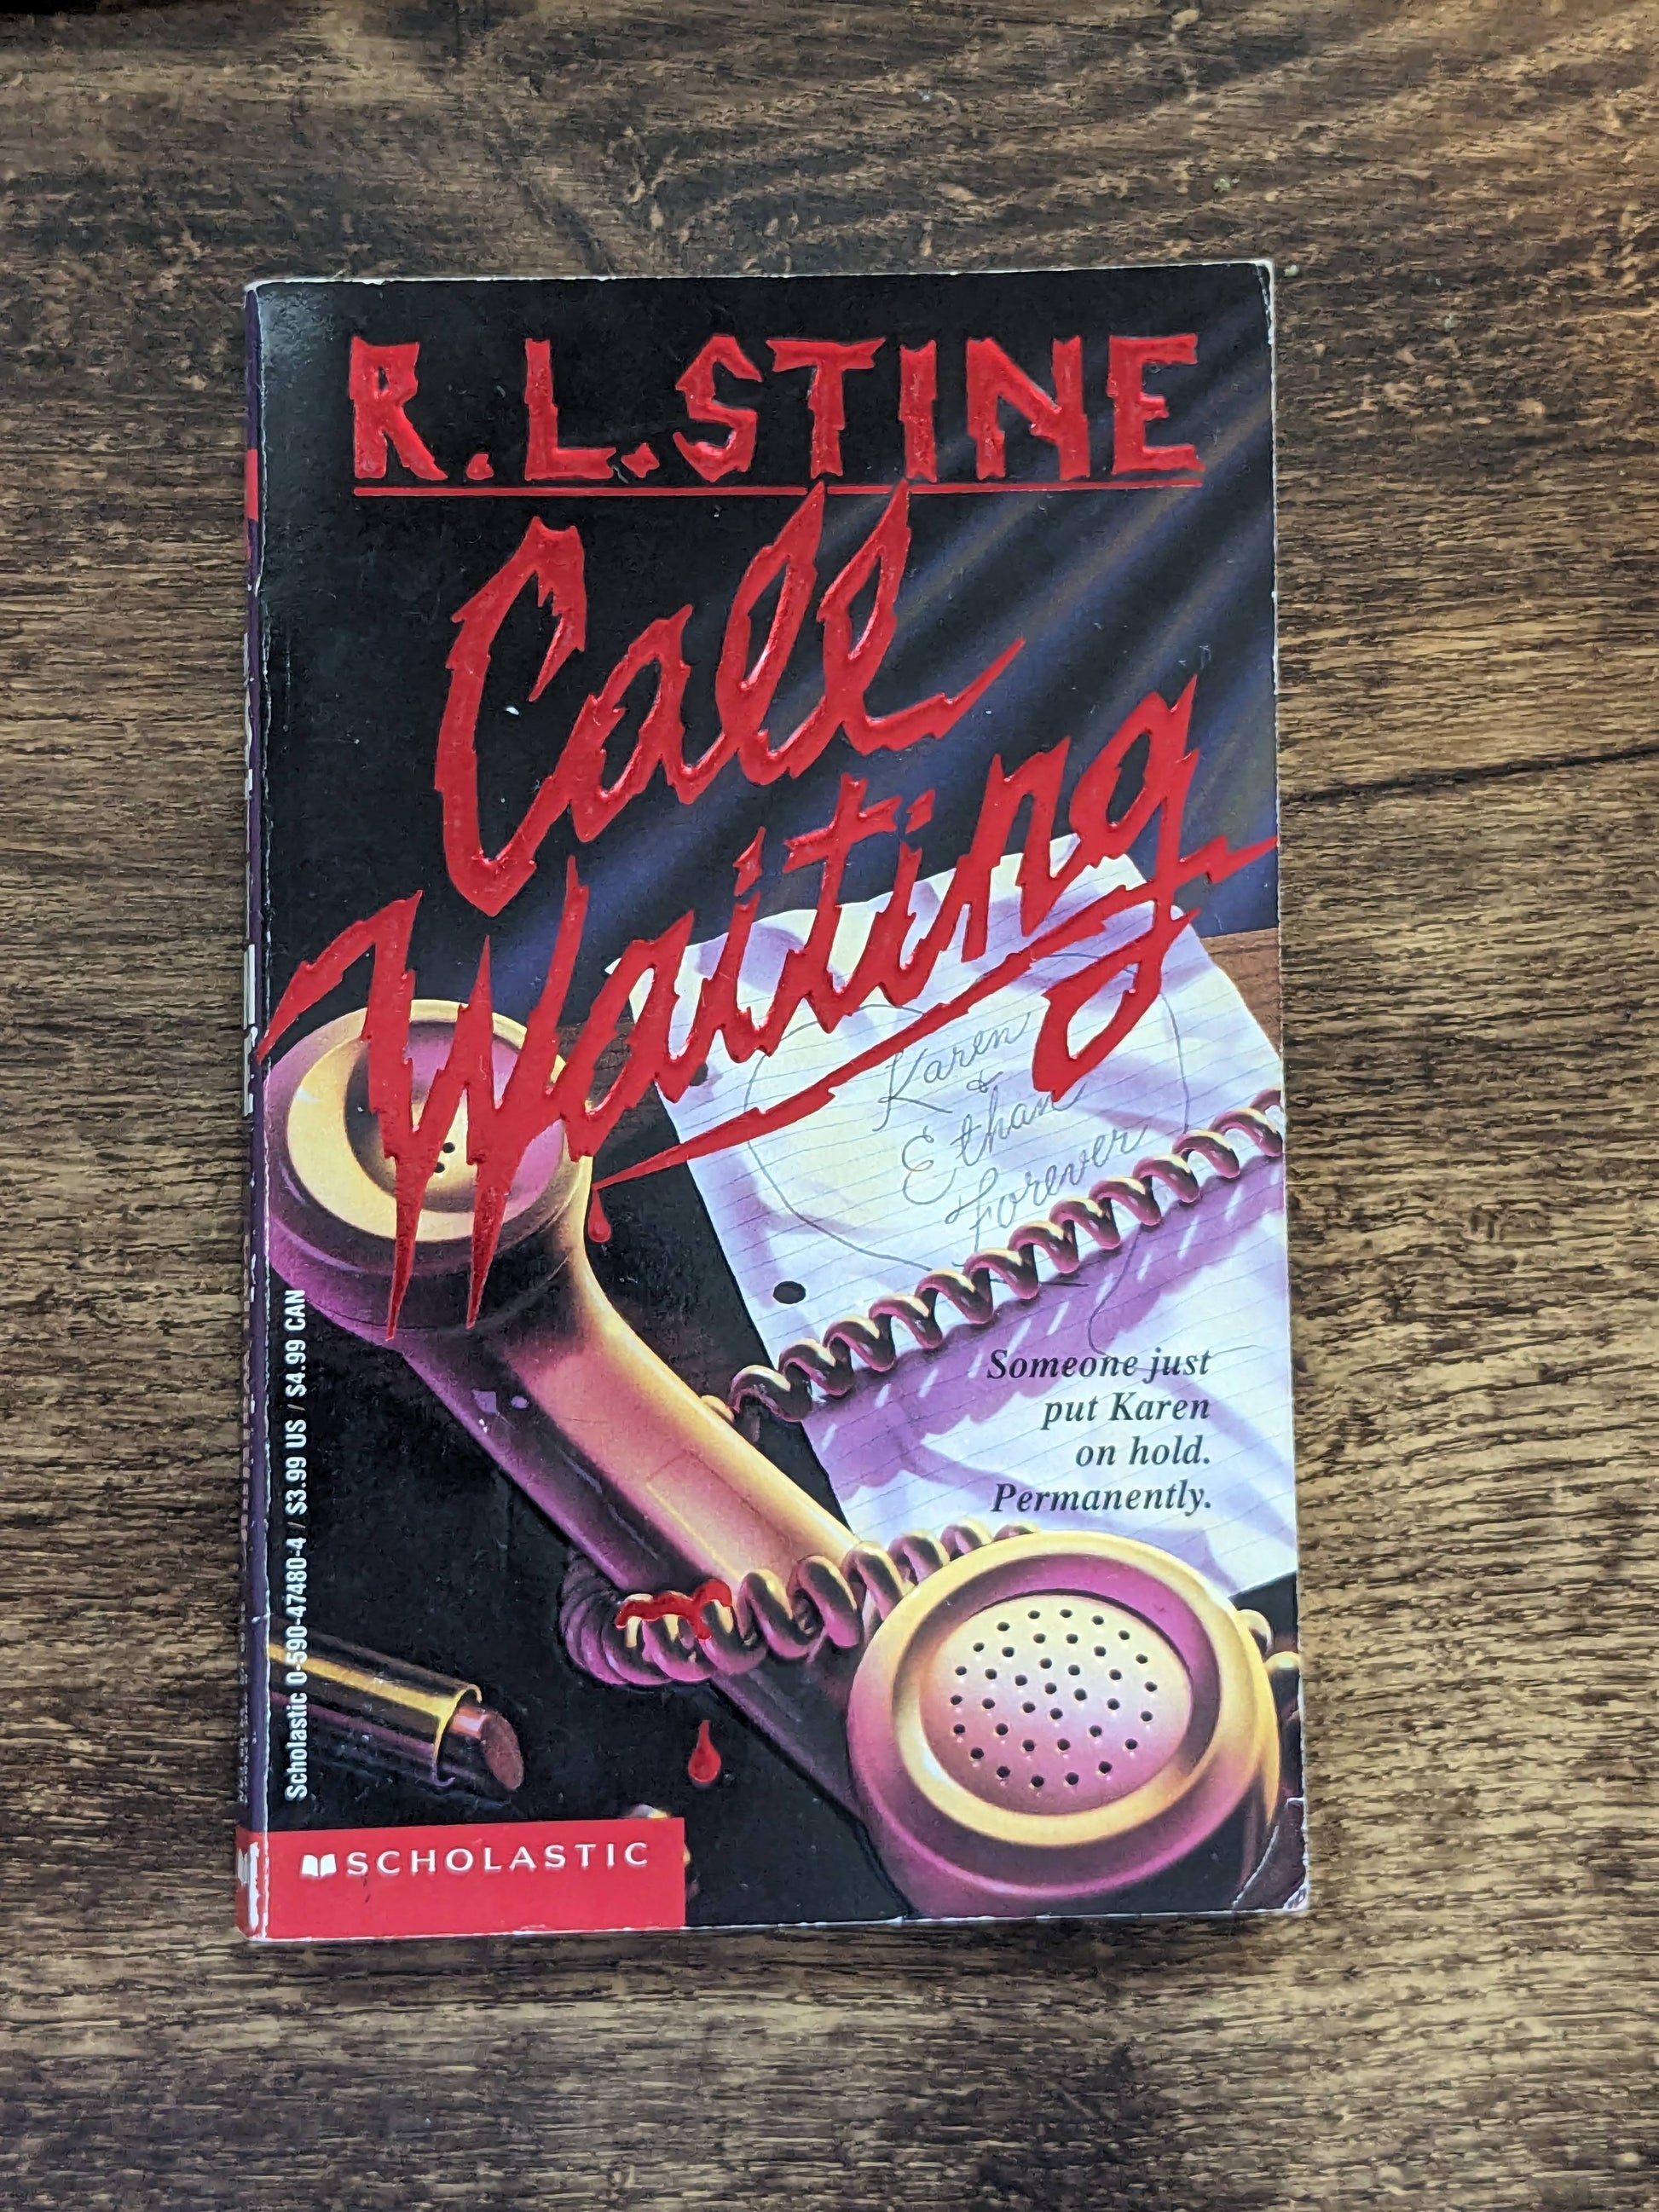 CALL WAITING by RL Stine (Point Horror) Author of Fear Street, Goosebumps, Vintage 1994 Paperback Retro Scary Book 90's Throwback Rare - Asylum Books